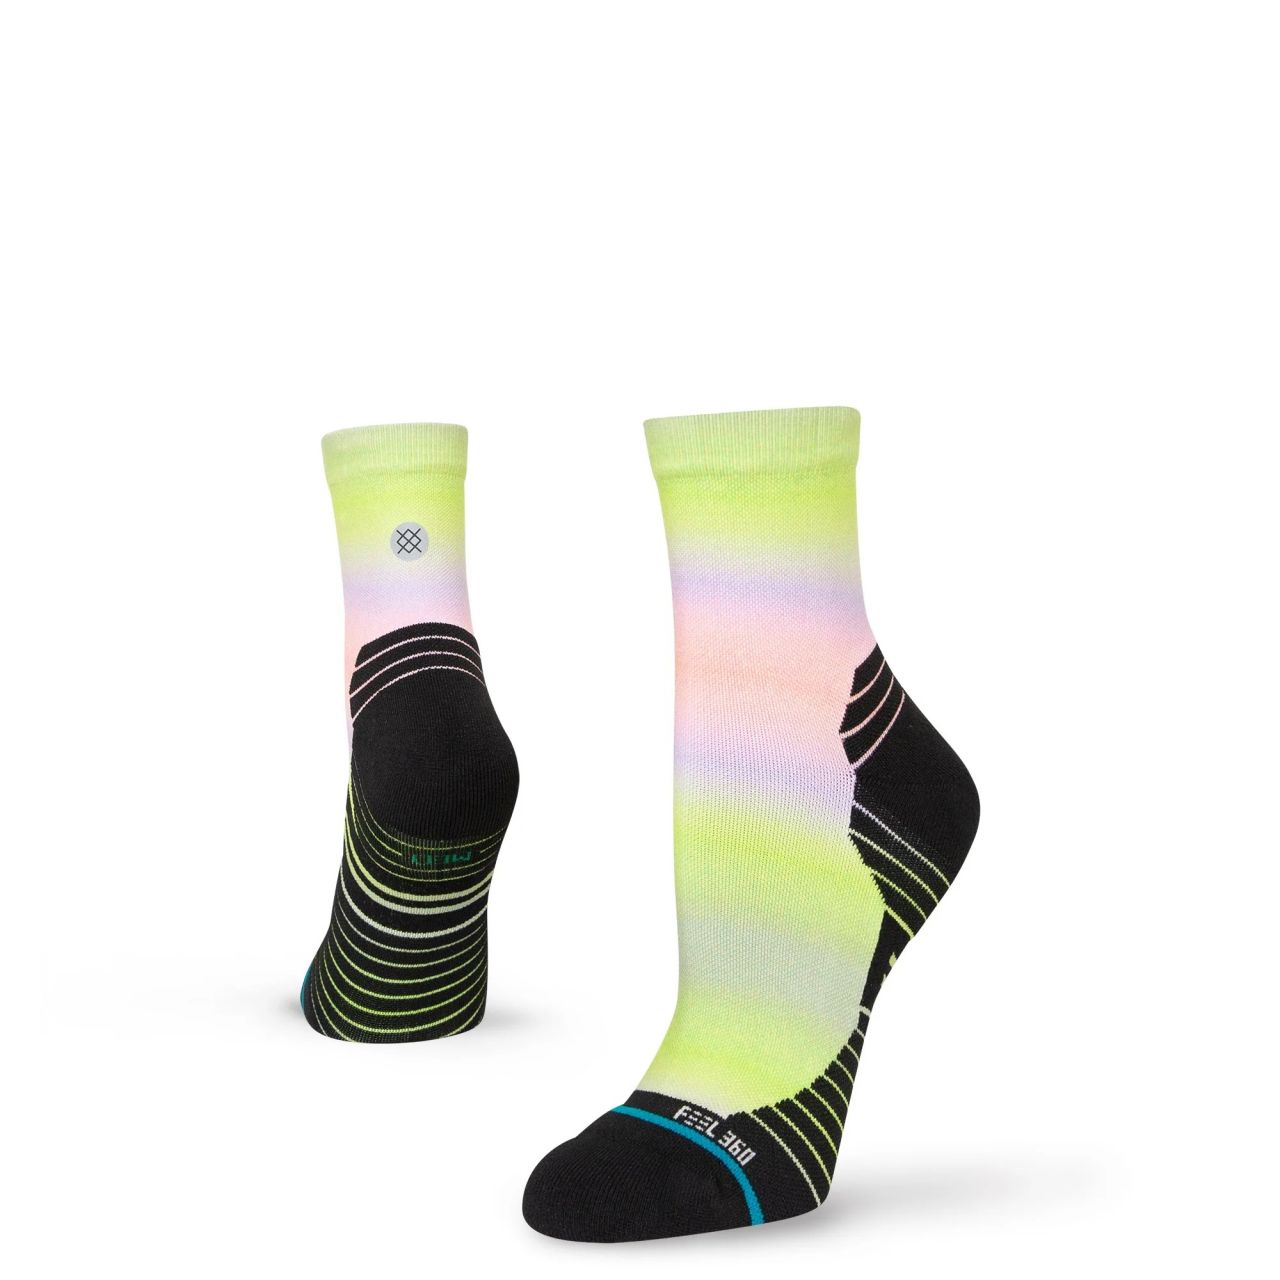 STANCE CHAUSSETTES BASSES ALL TIME   Chaussettes de running